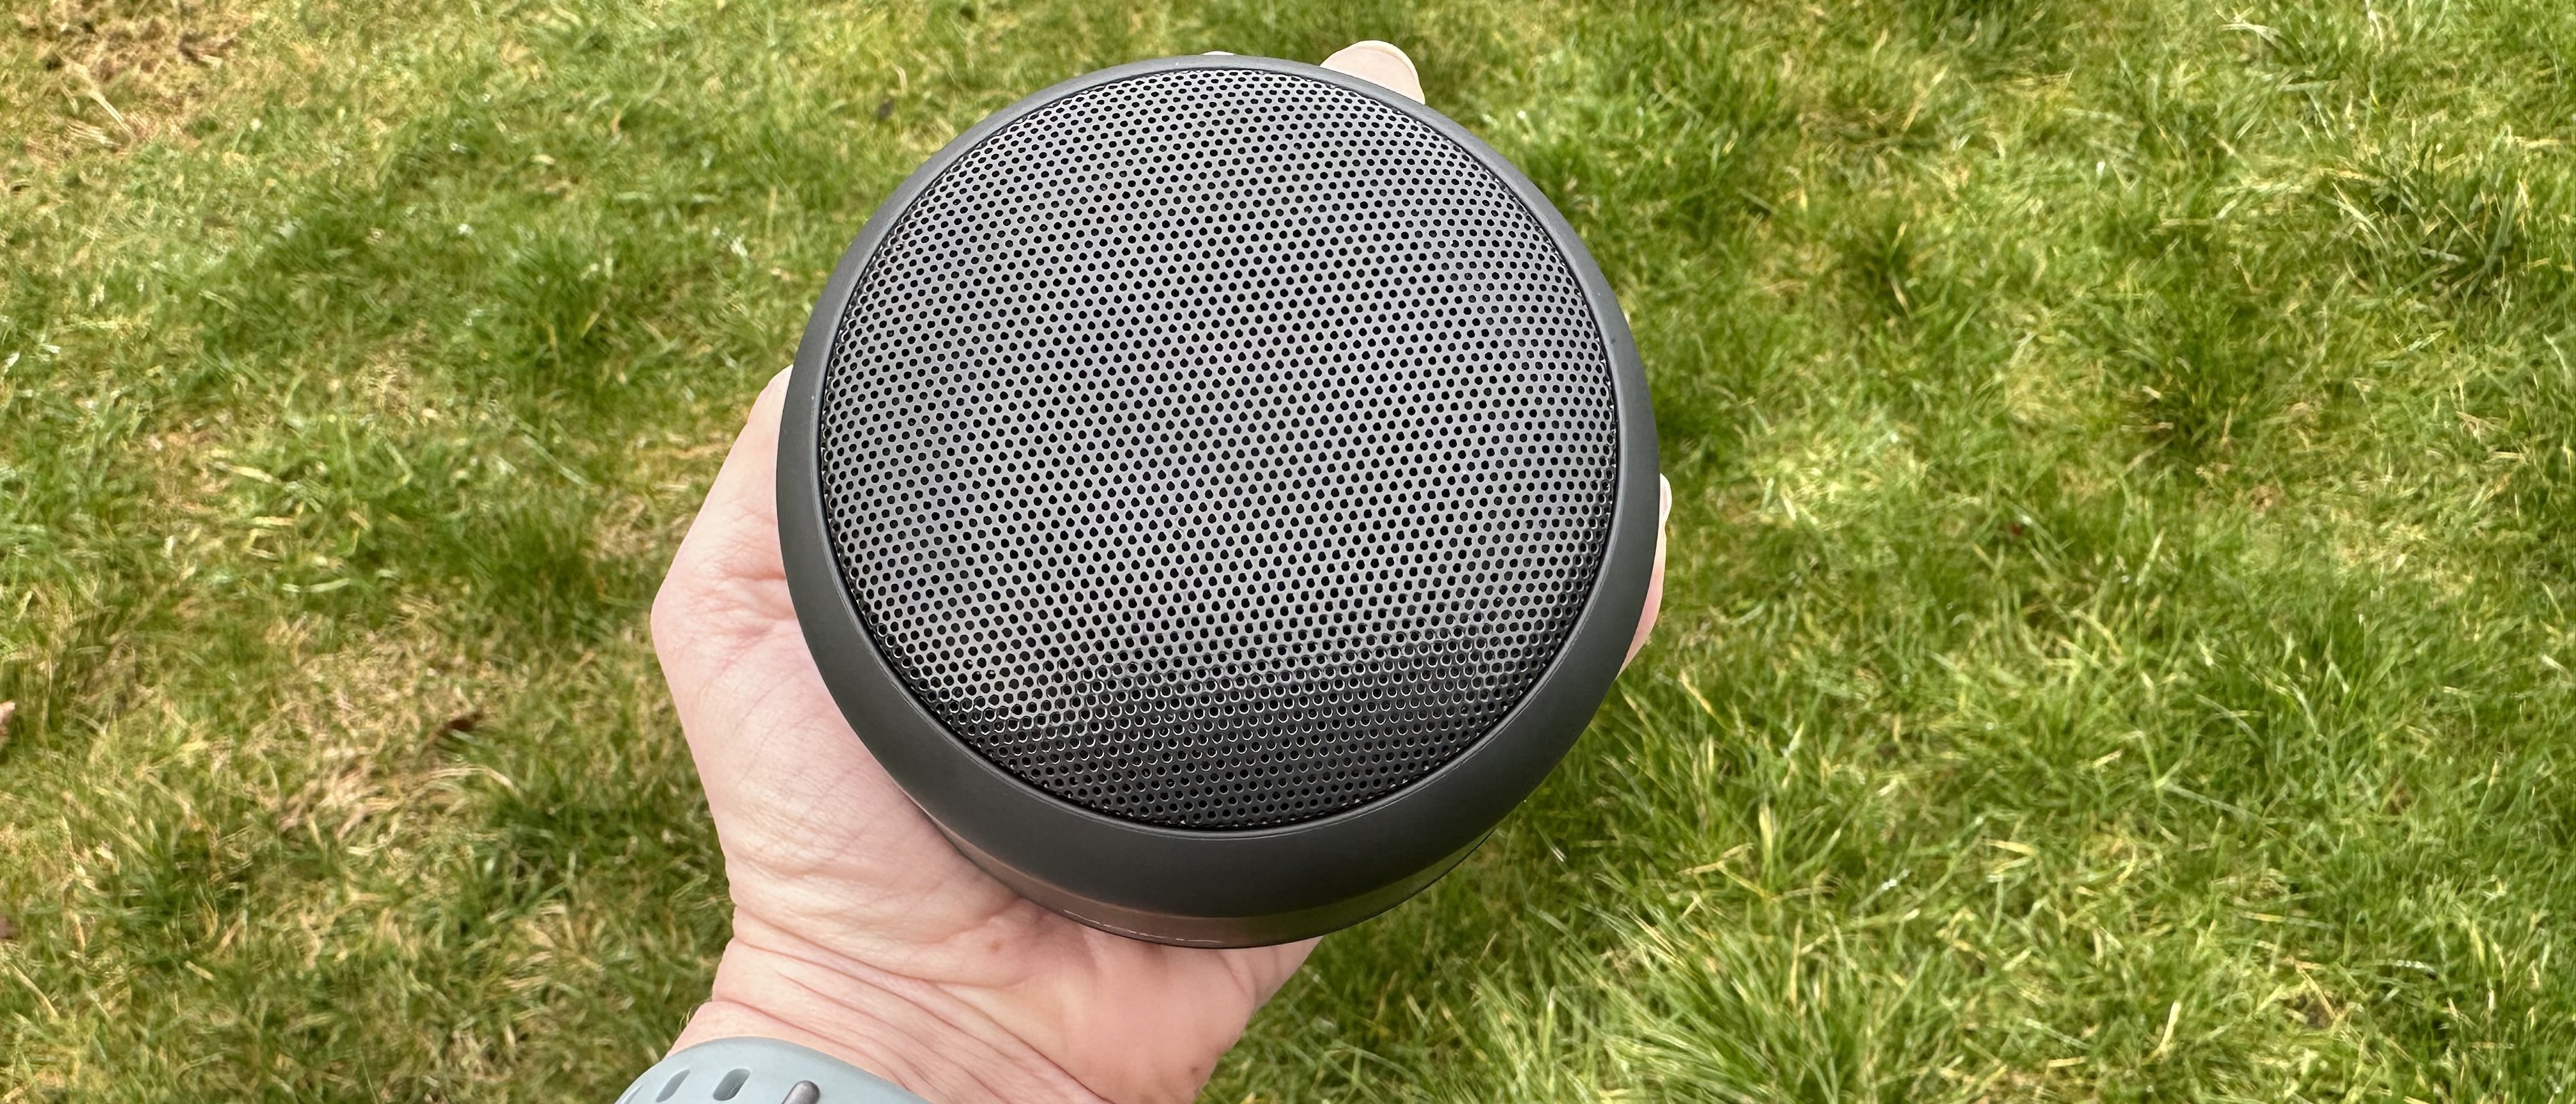 Speaker cheap 2 huge with | Bluetooth review: TechRadar life Nokia a Portable battery speaker Wireless